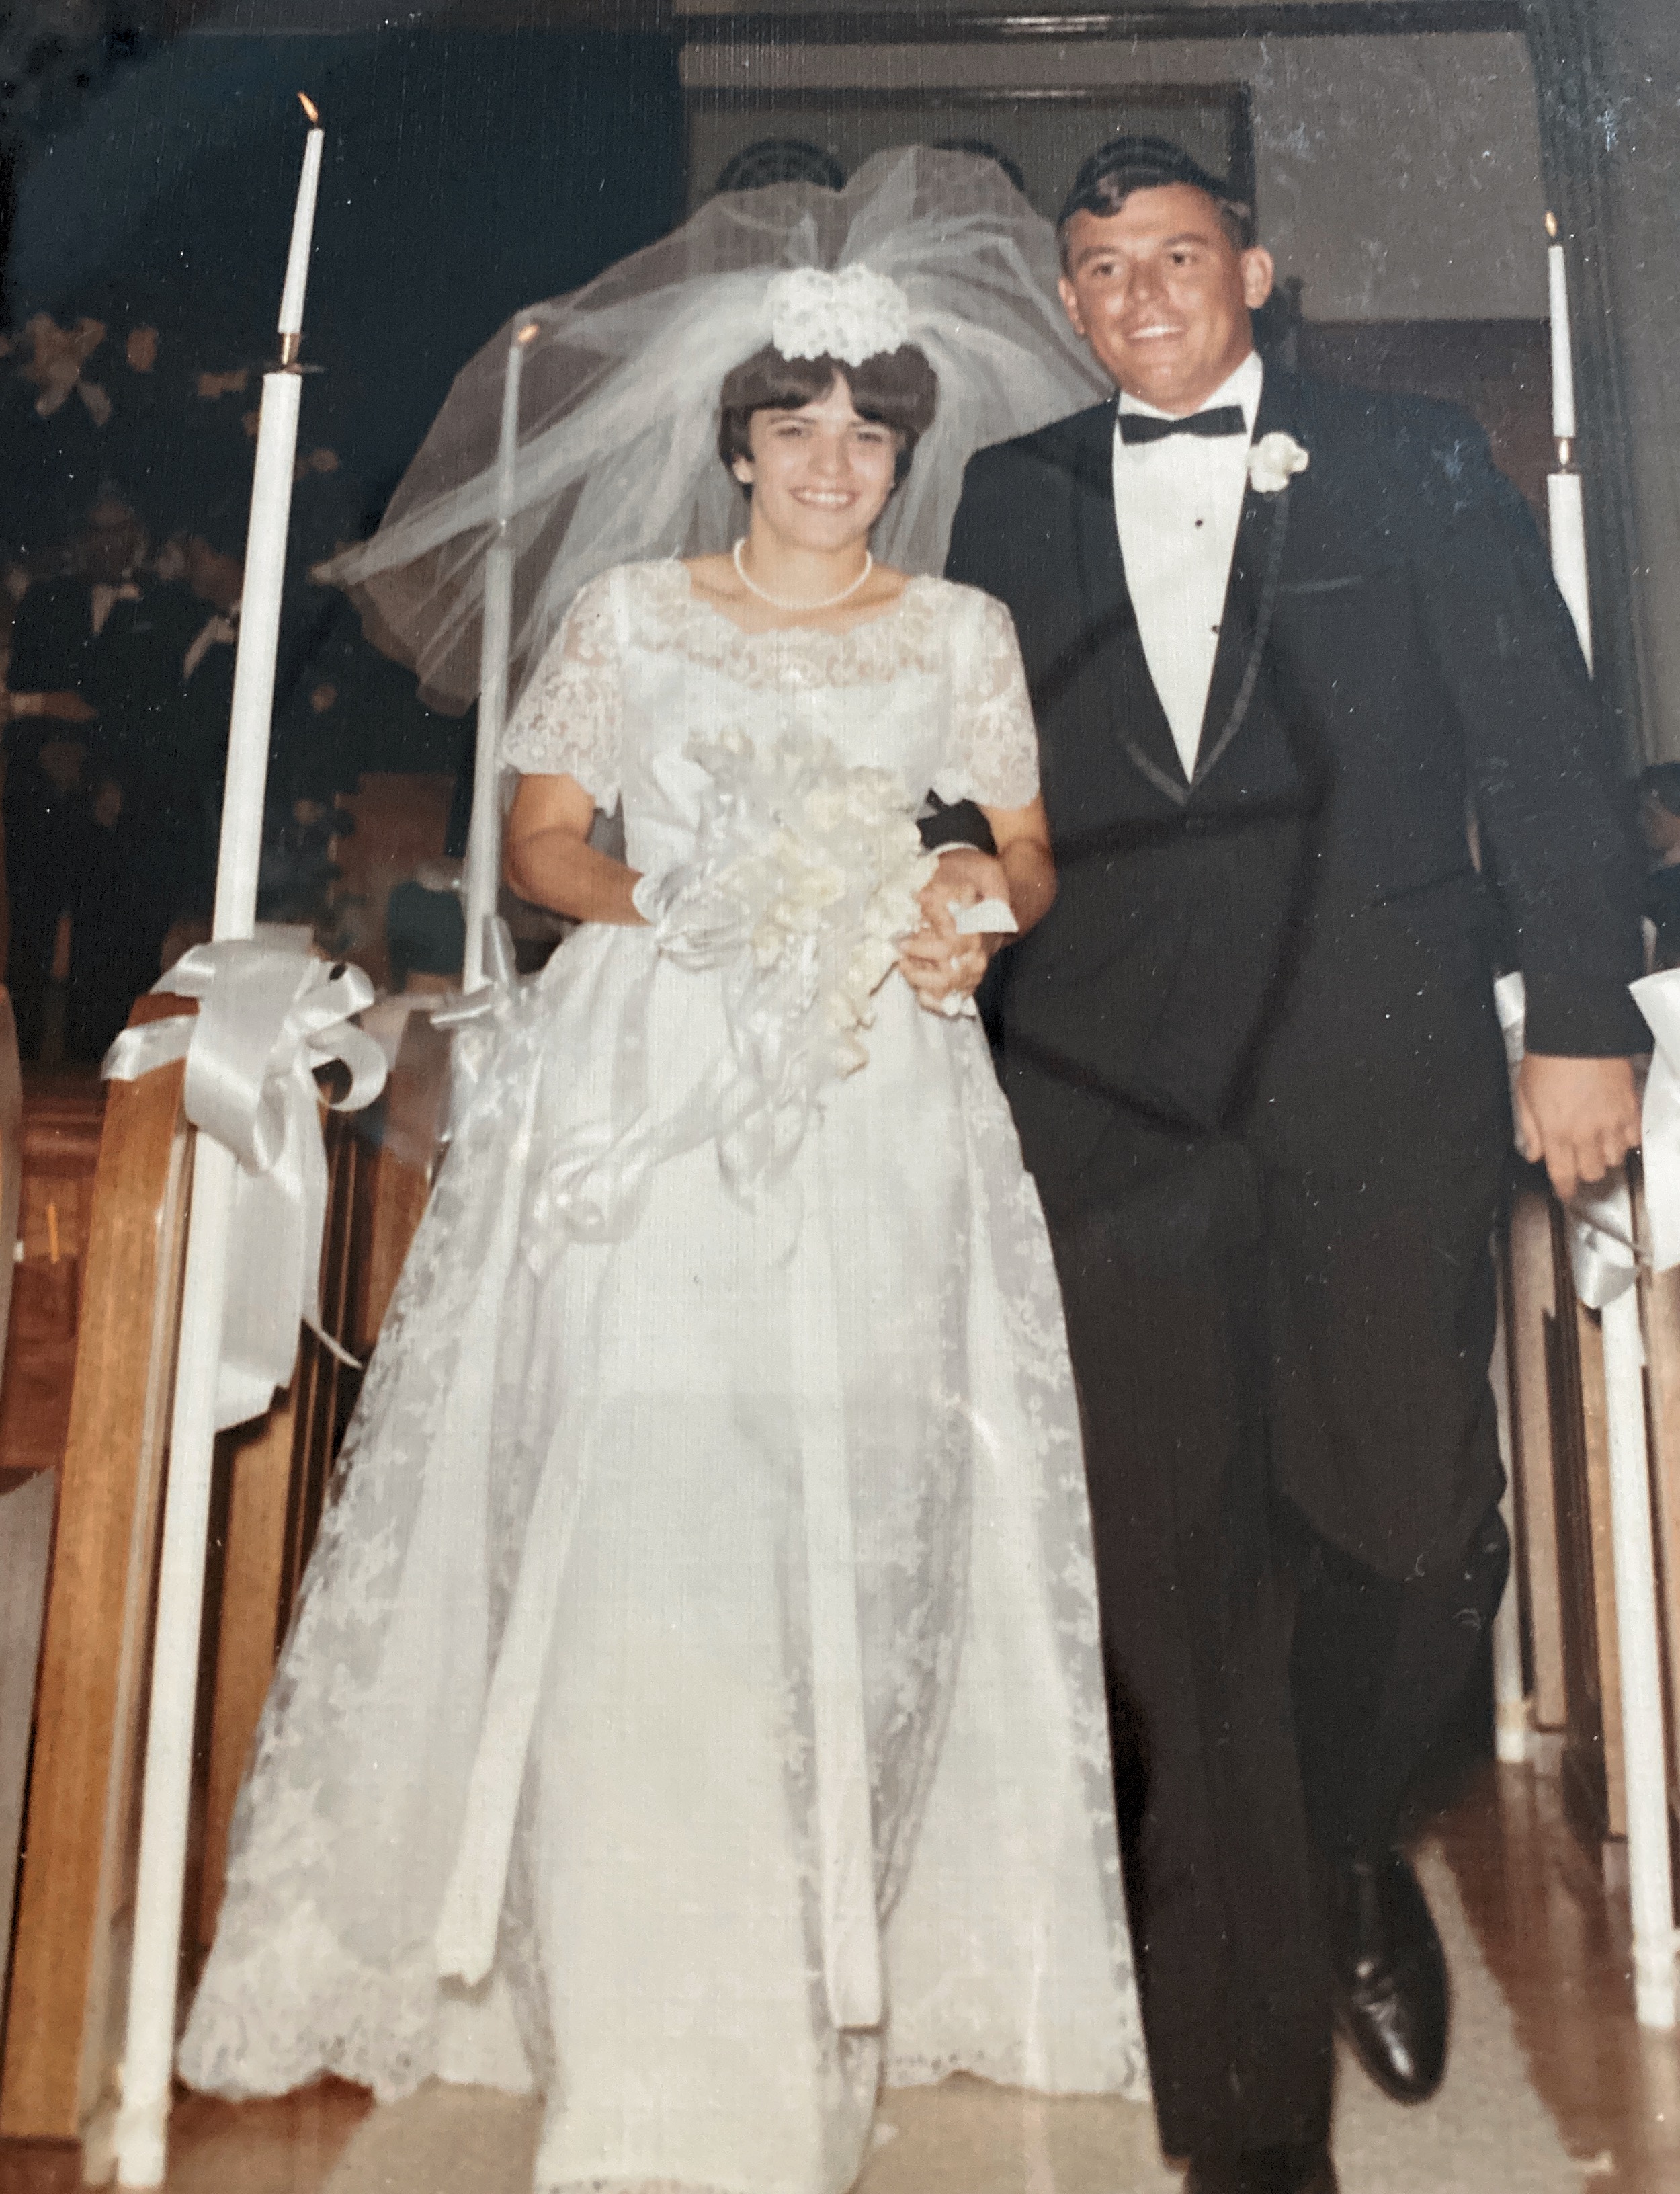 Our wedding day, August 12, 1967.